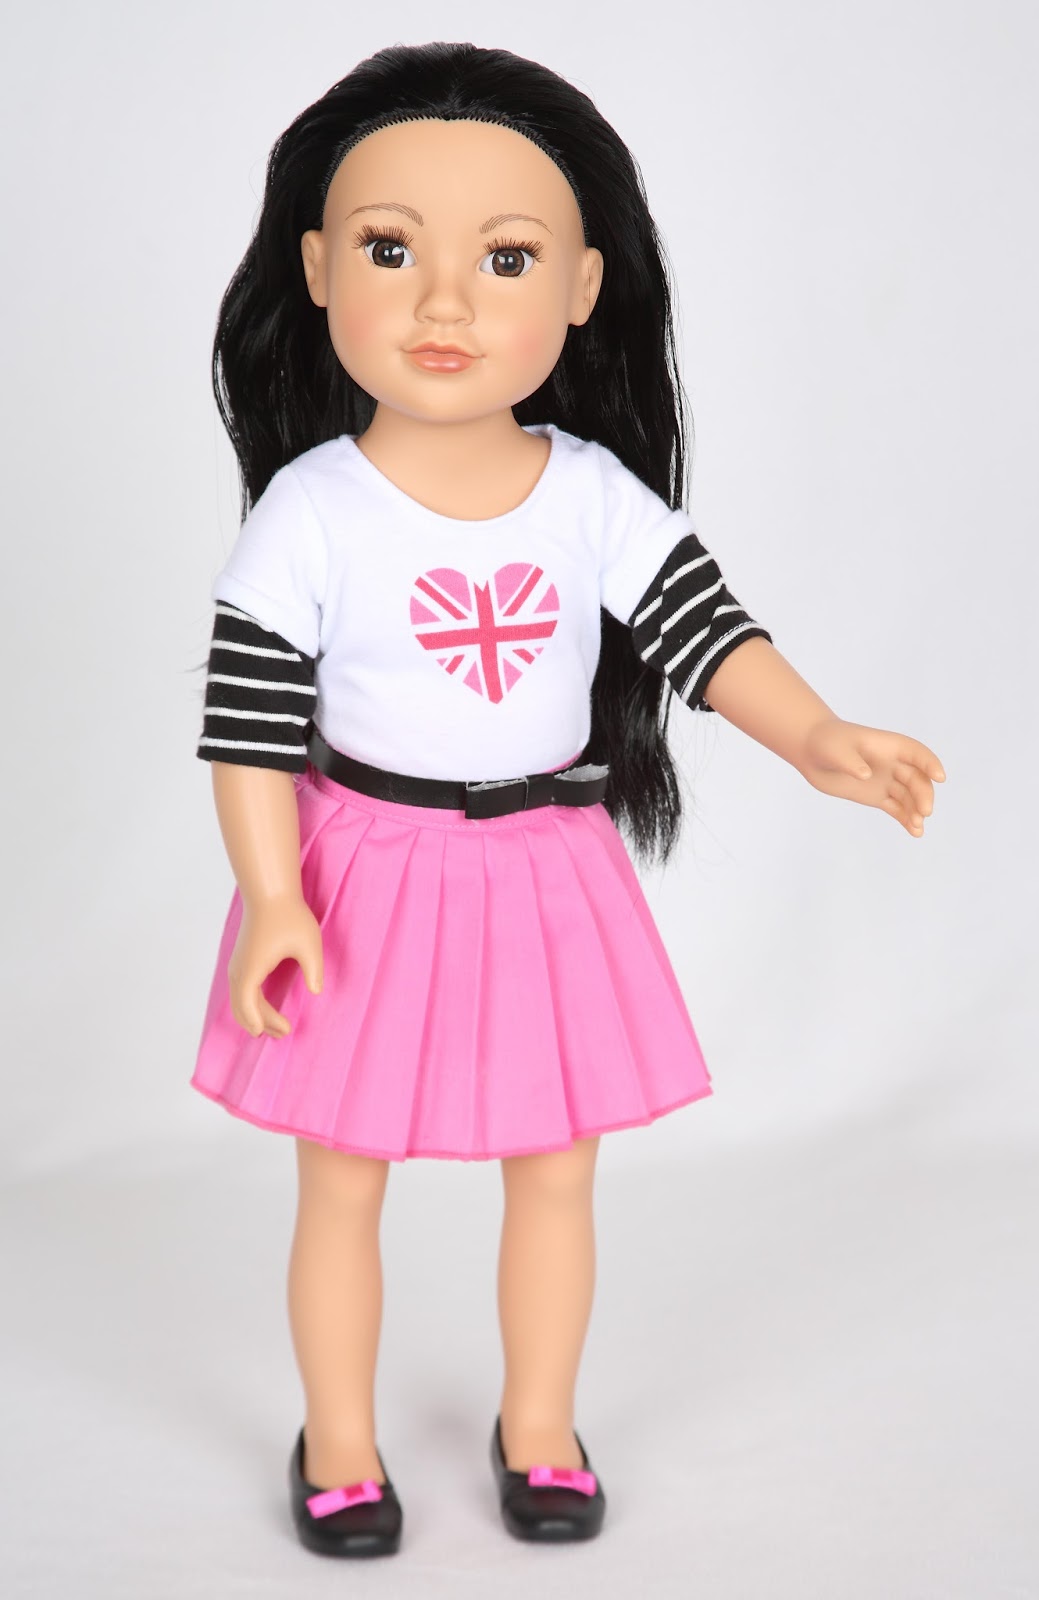 Journey Girls 18 Doll Callie 81987 Exclusive Multicolor